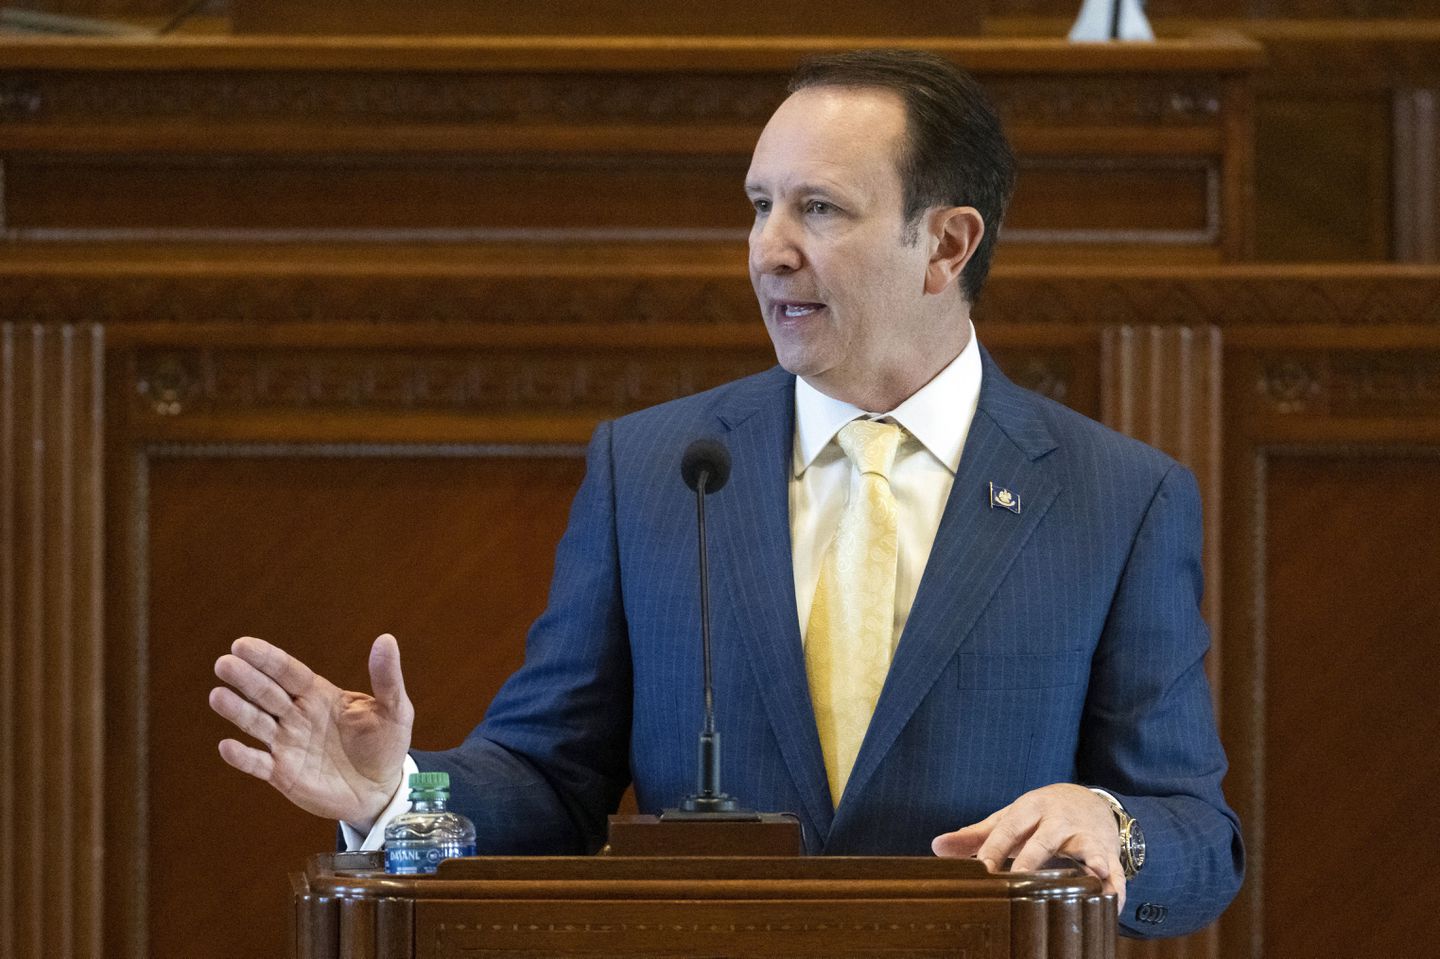 Louisiana Governor Jeff Landry addresses members of the House and Senate on the opening day of a legislative special session in the House Chamber at the State Capitol in Baton Rouge, La.